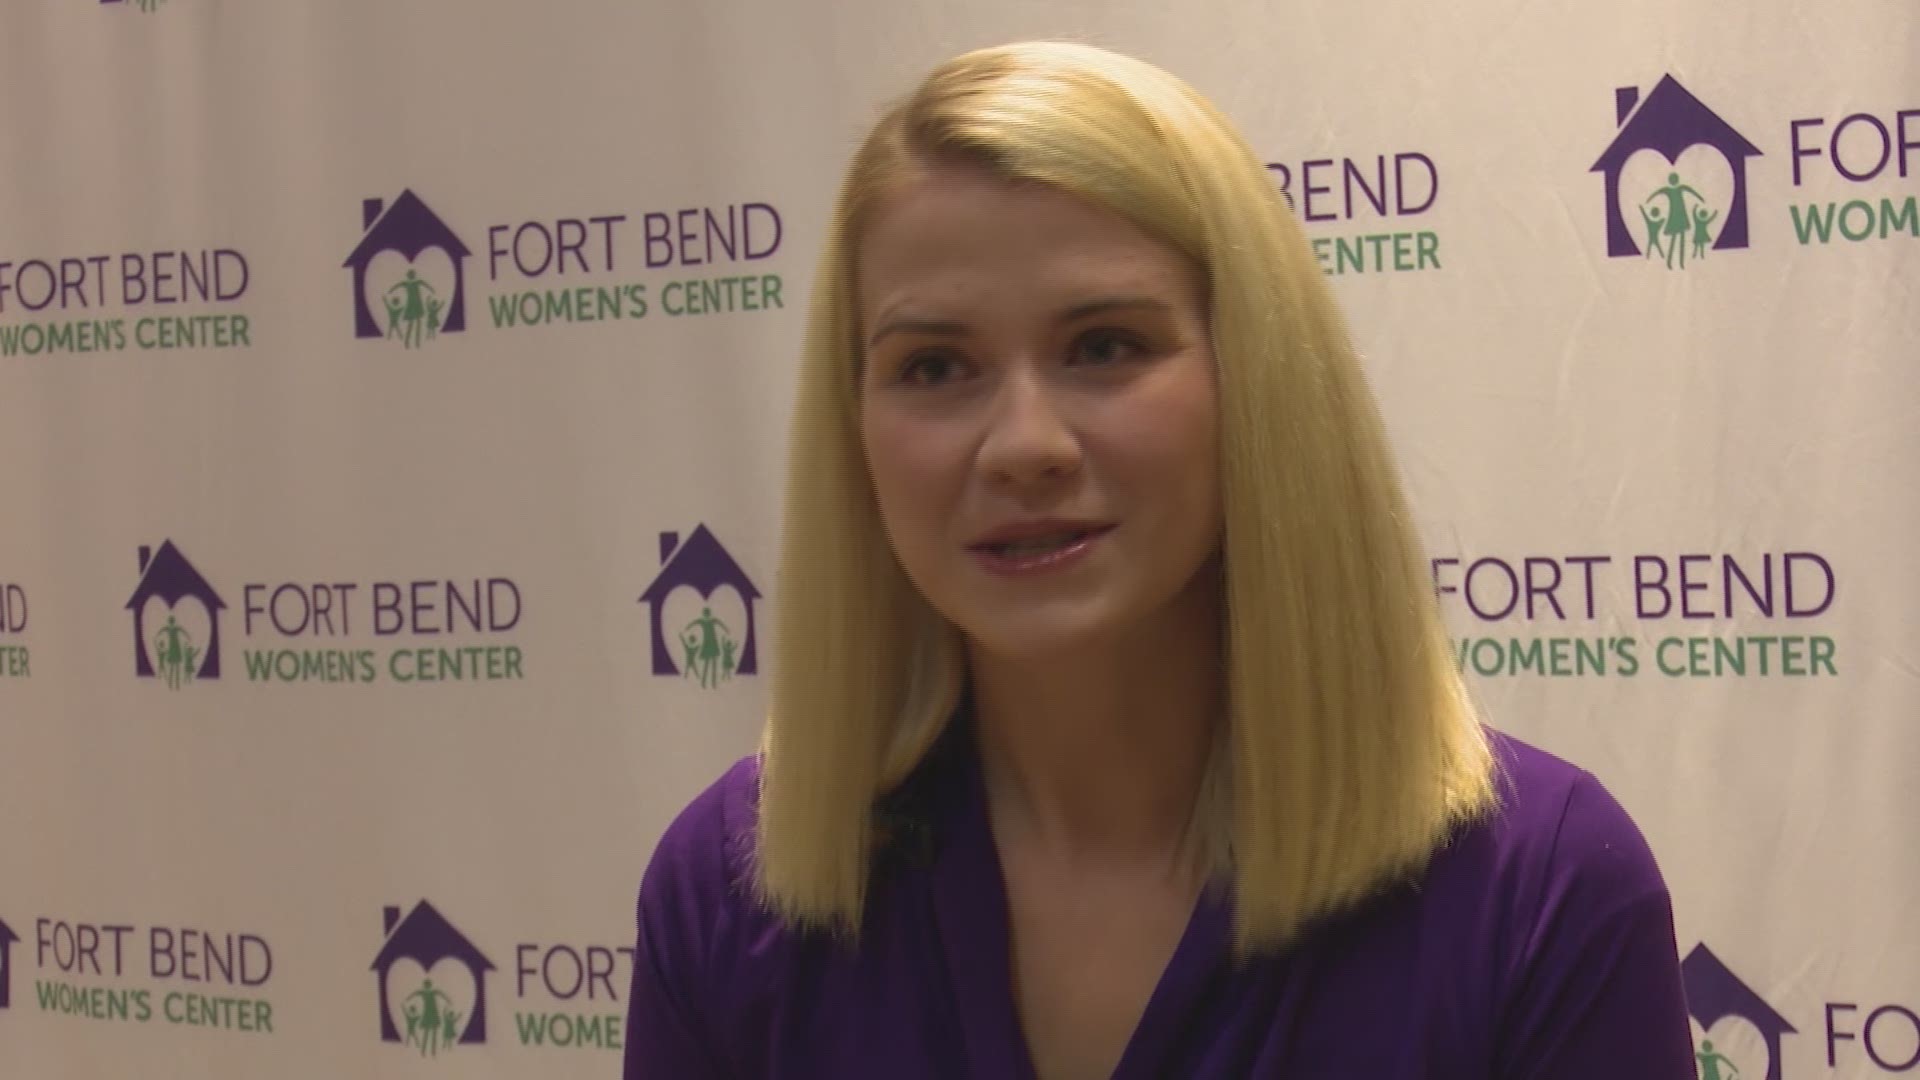 While she was there, KHOU's Brandi Smith spoke with her about her ordeal and life now.